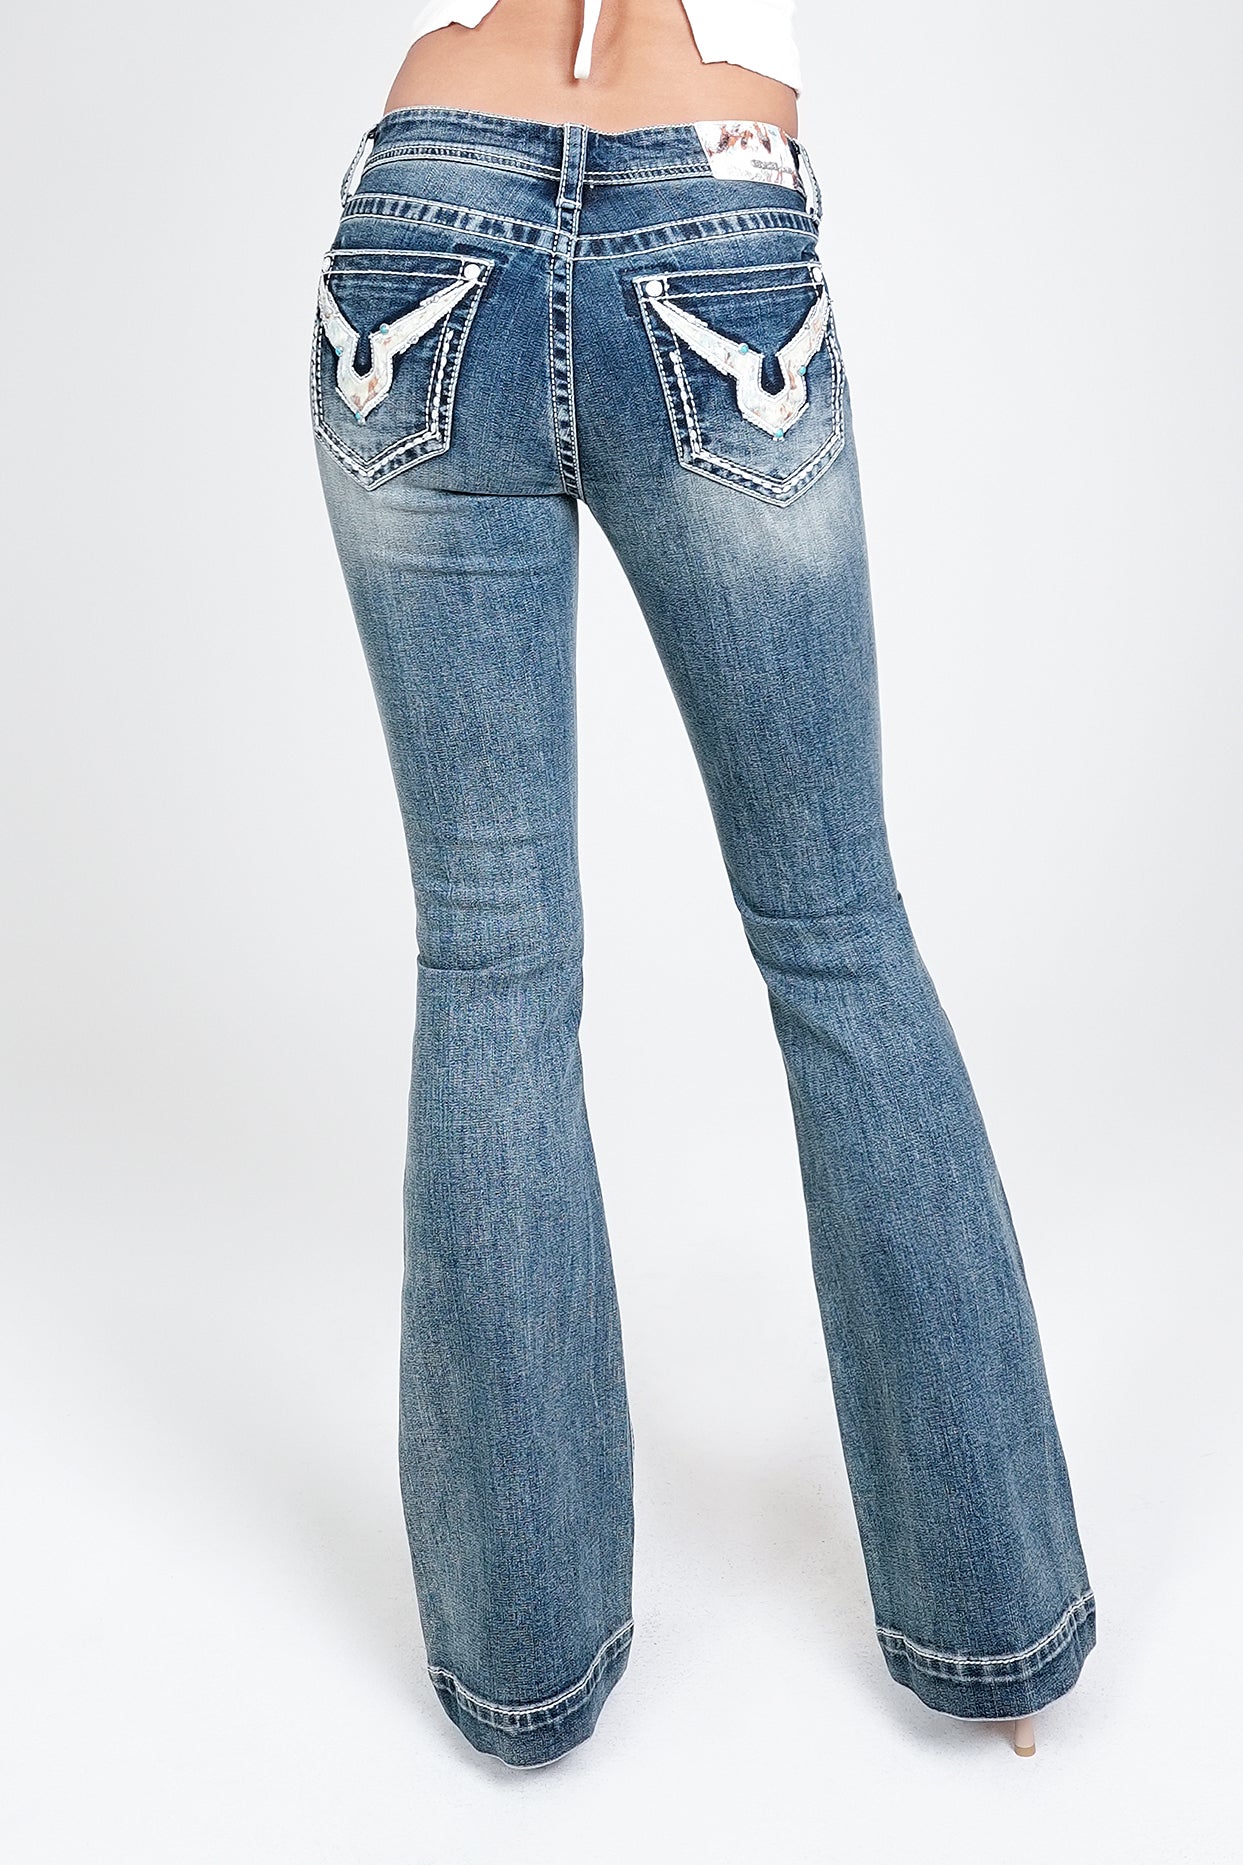 Horns Modify Horse hide Trims Embellished Mid Rise Bootcut Jeans